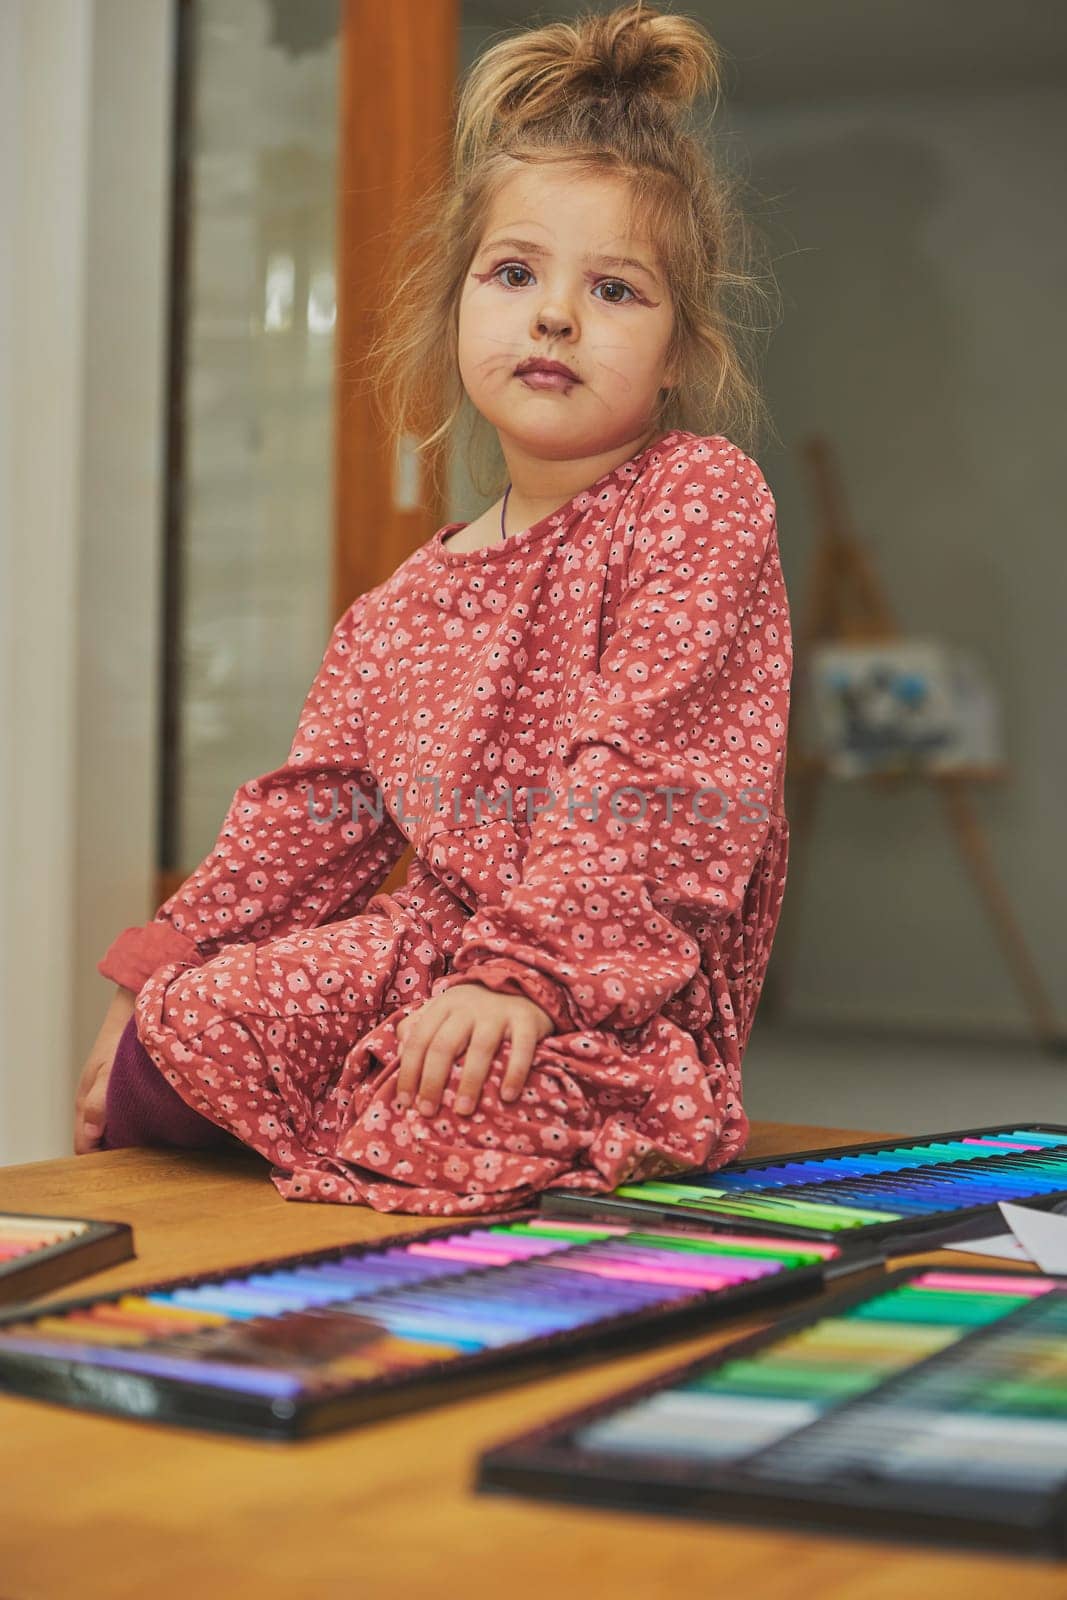 Charming child made makeup with felt-tip pens at home by Viktor_Osypenko